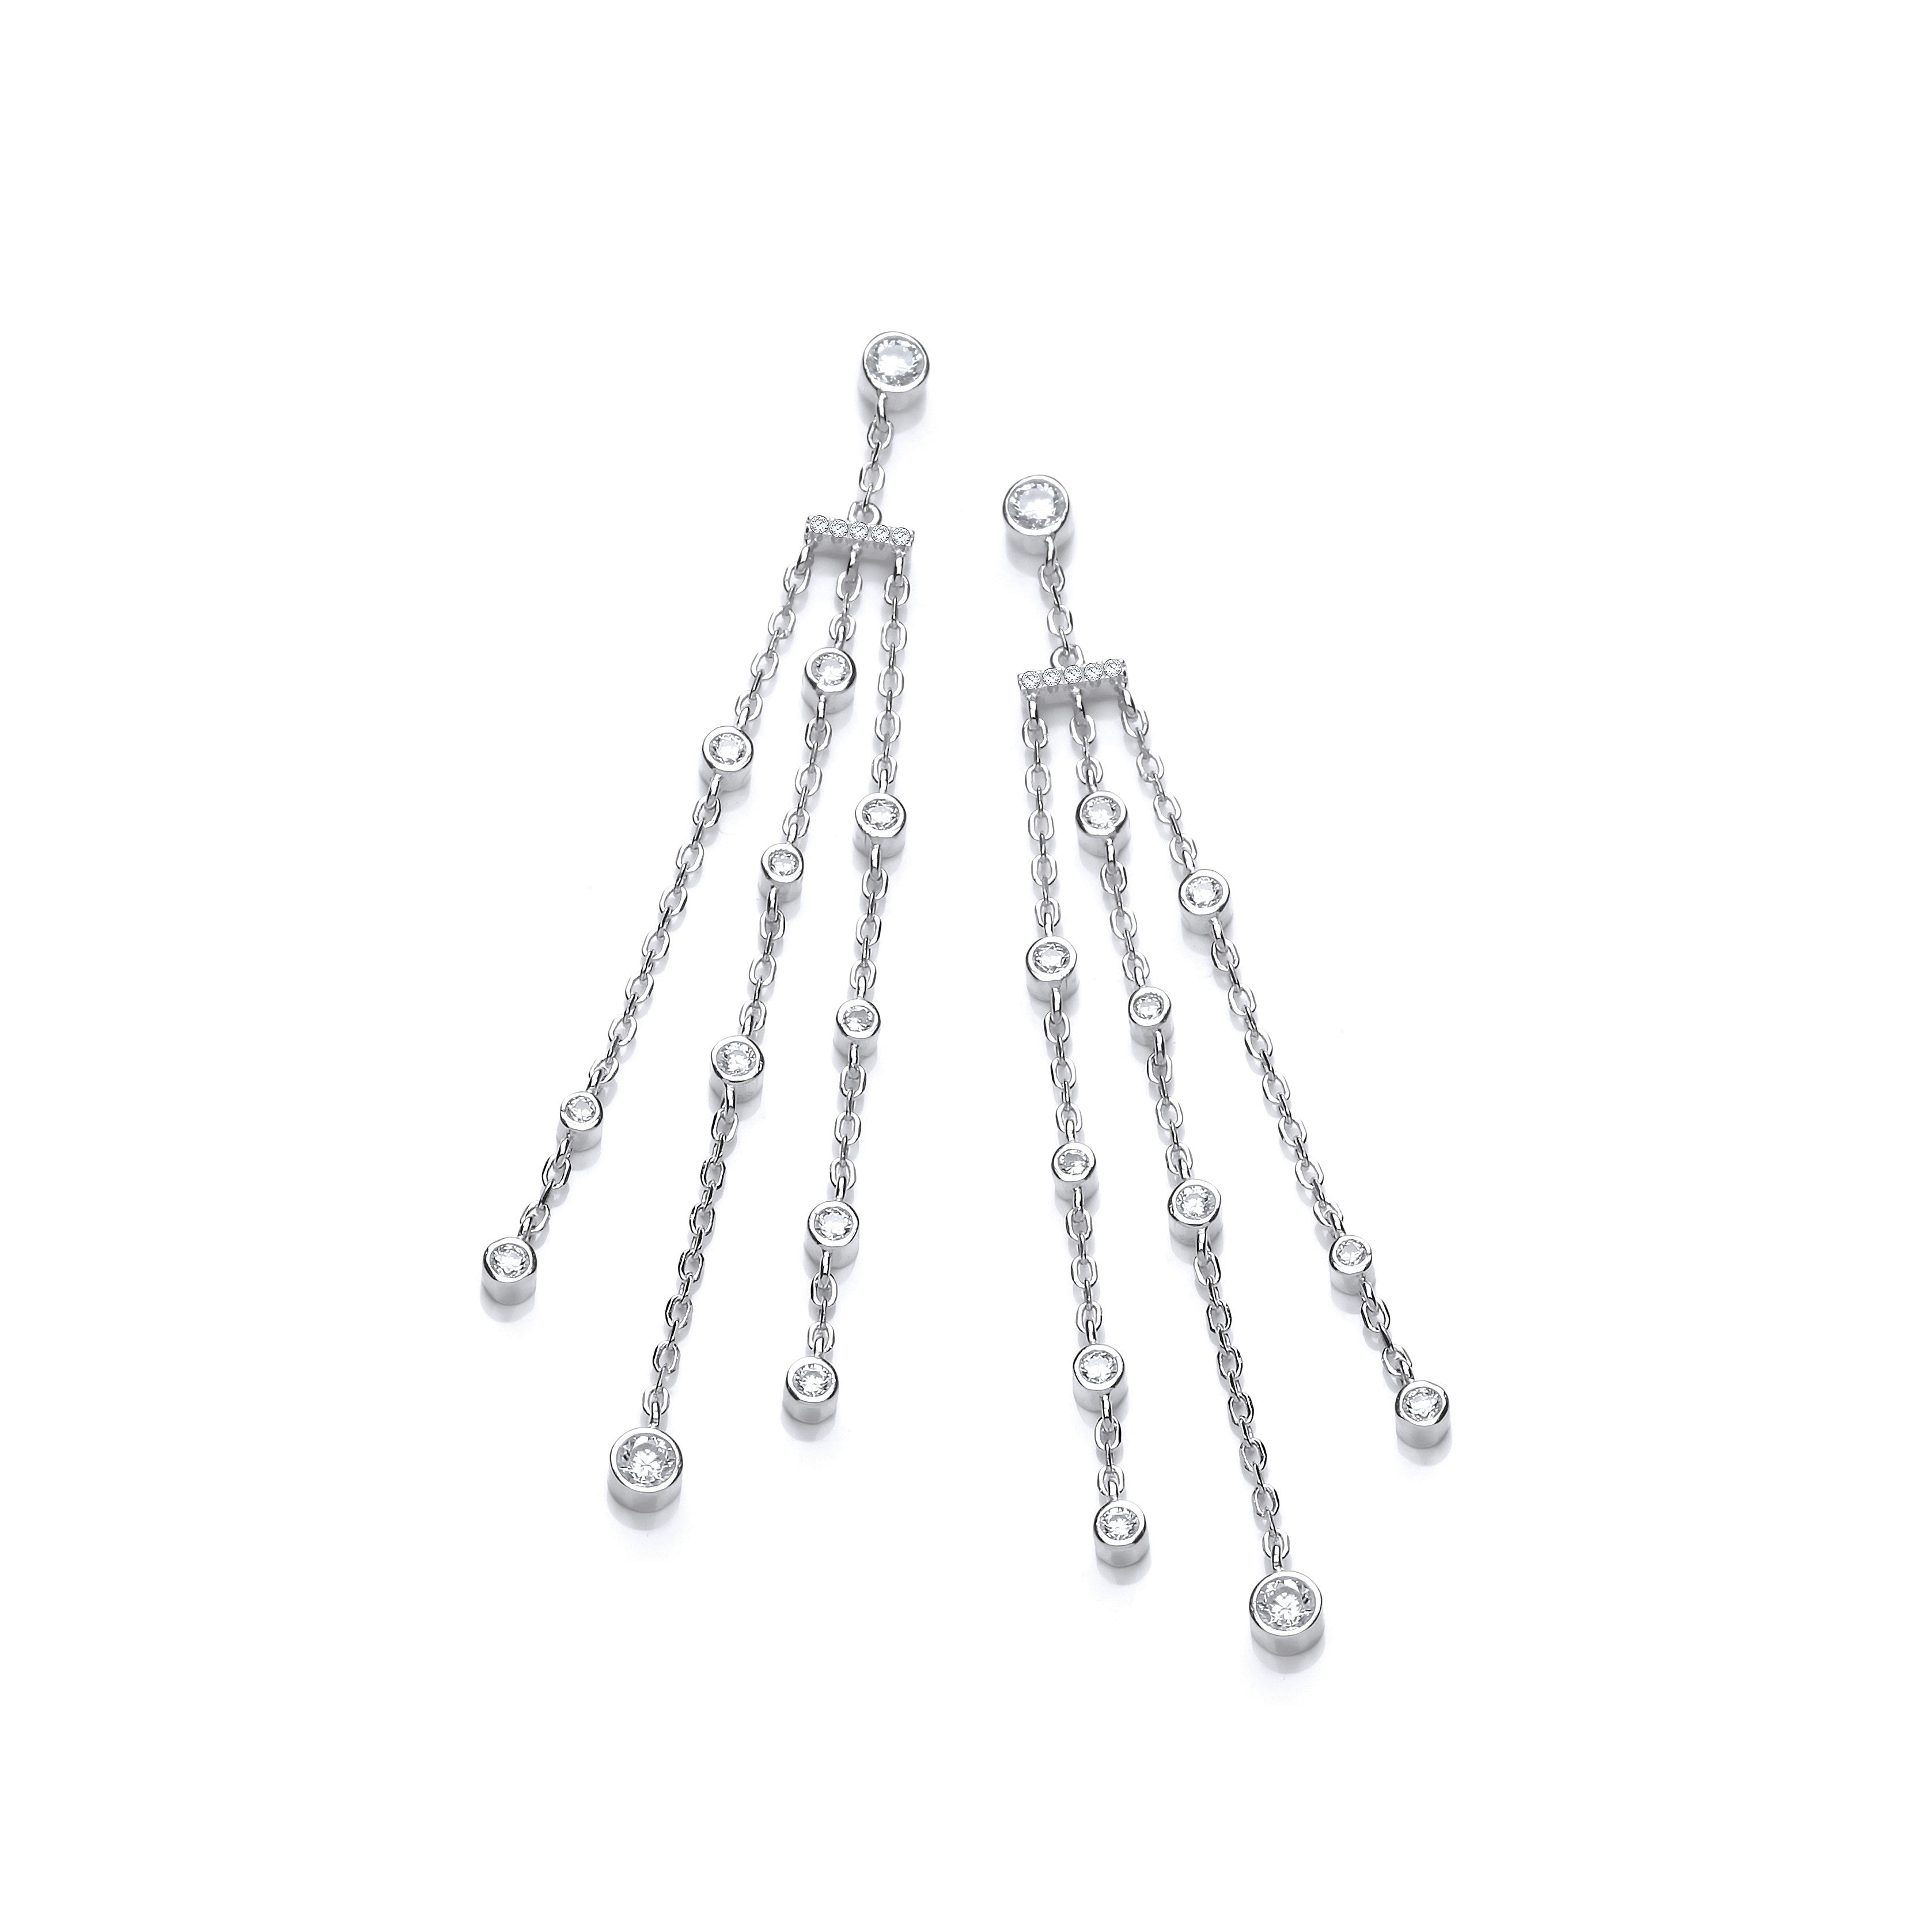 Three Strings with Rubover CZs Silver Drop Earrings